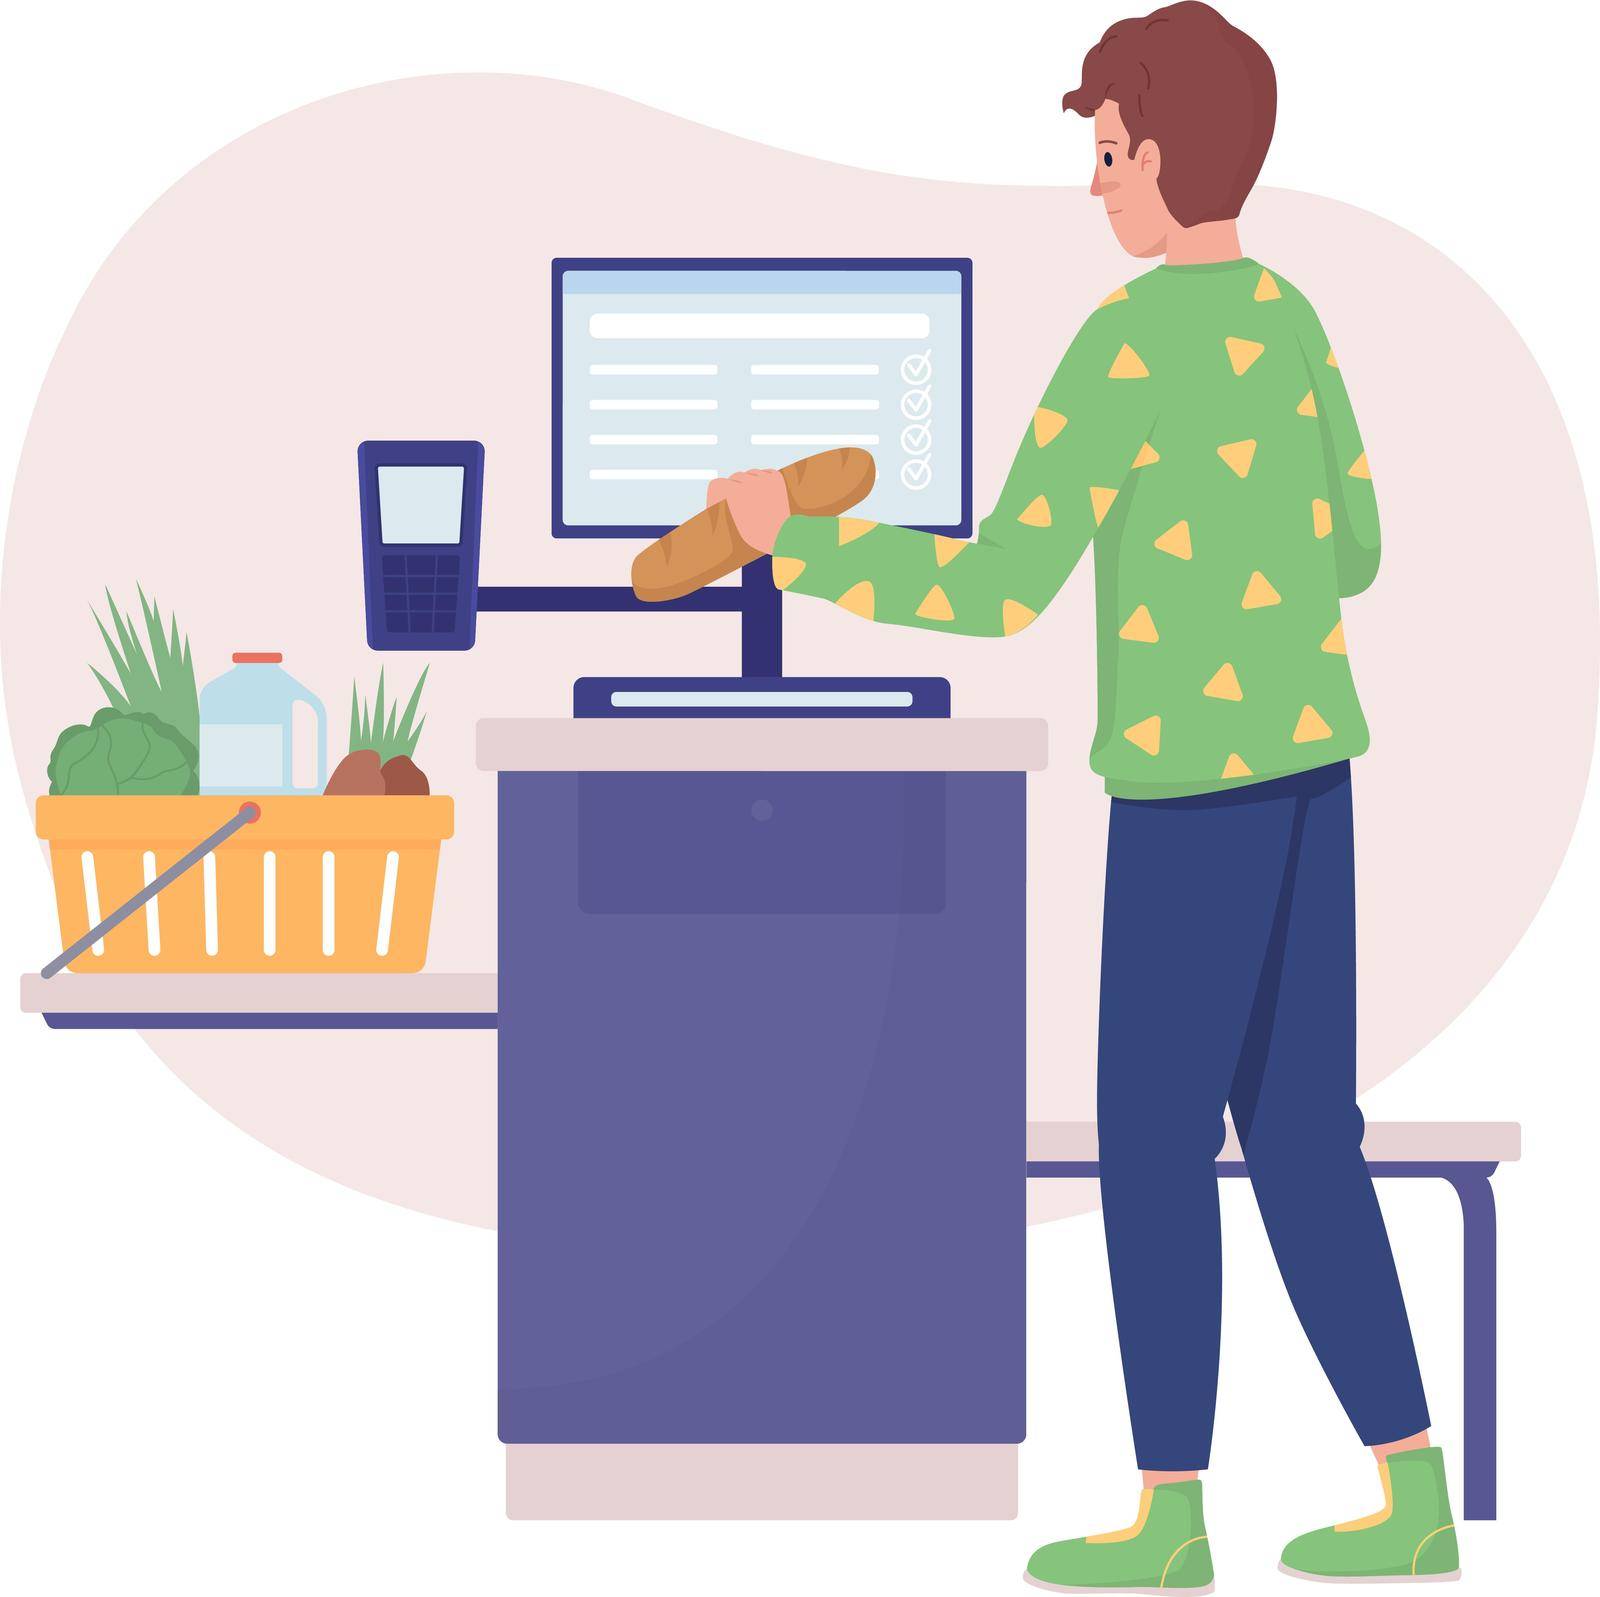 Scanner food in shop 2D vector isolated illustration. Man buying groceries at self checkout flat characters on cartoon background. Everyday situation and common tasks colourful scene